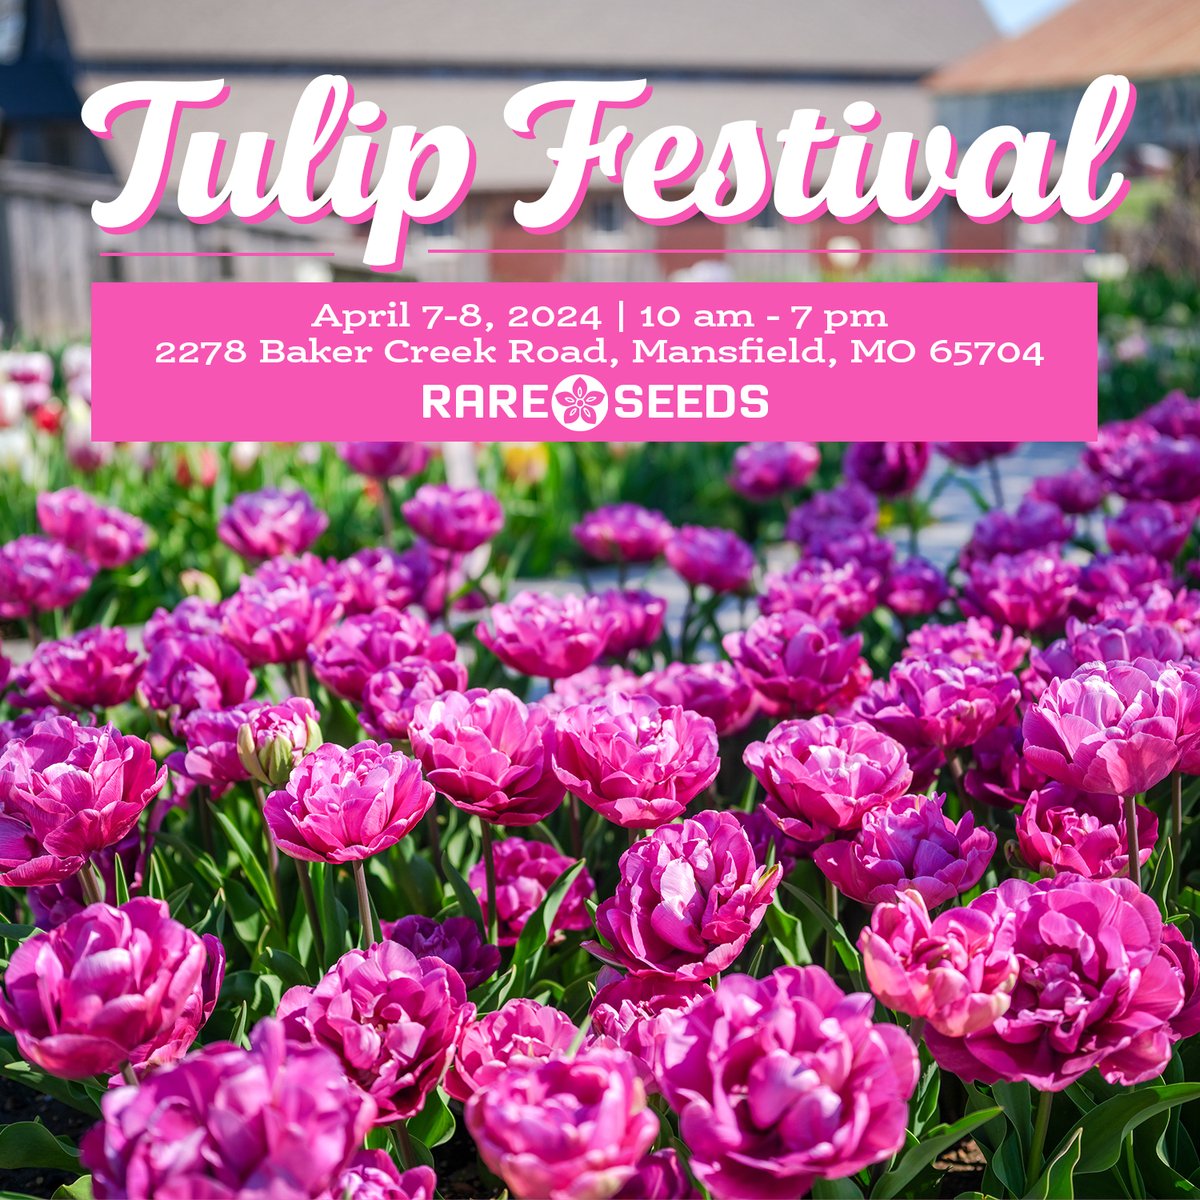 🌷 Come and enjoy tulips at their peak! 🌷 Enjoy expert speakers, local food, unique vendors, greenhouse and garden tours, and old-fashioned entertainment at Baker Creek's Mansfield, Missouri, farm! Join thousands of gardeners, farmers, and craftspeople to celebrate heirloom…